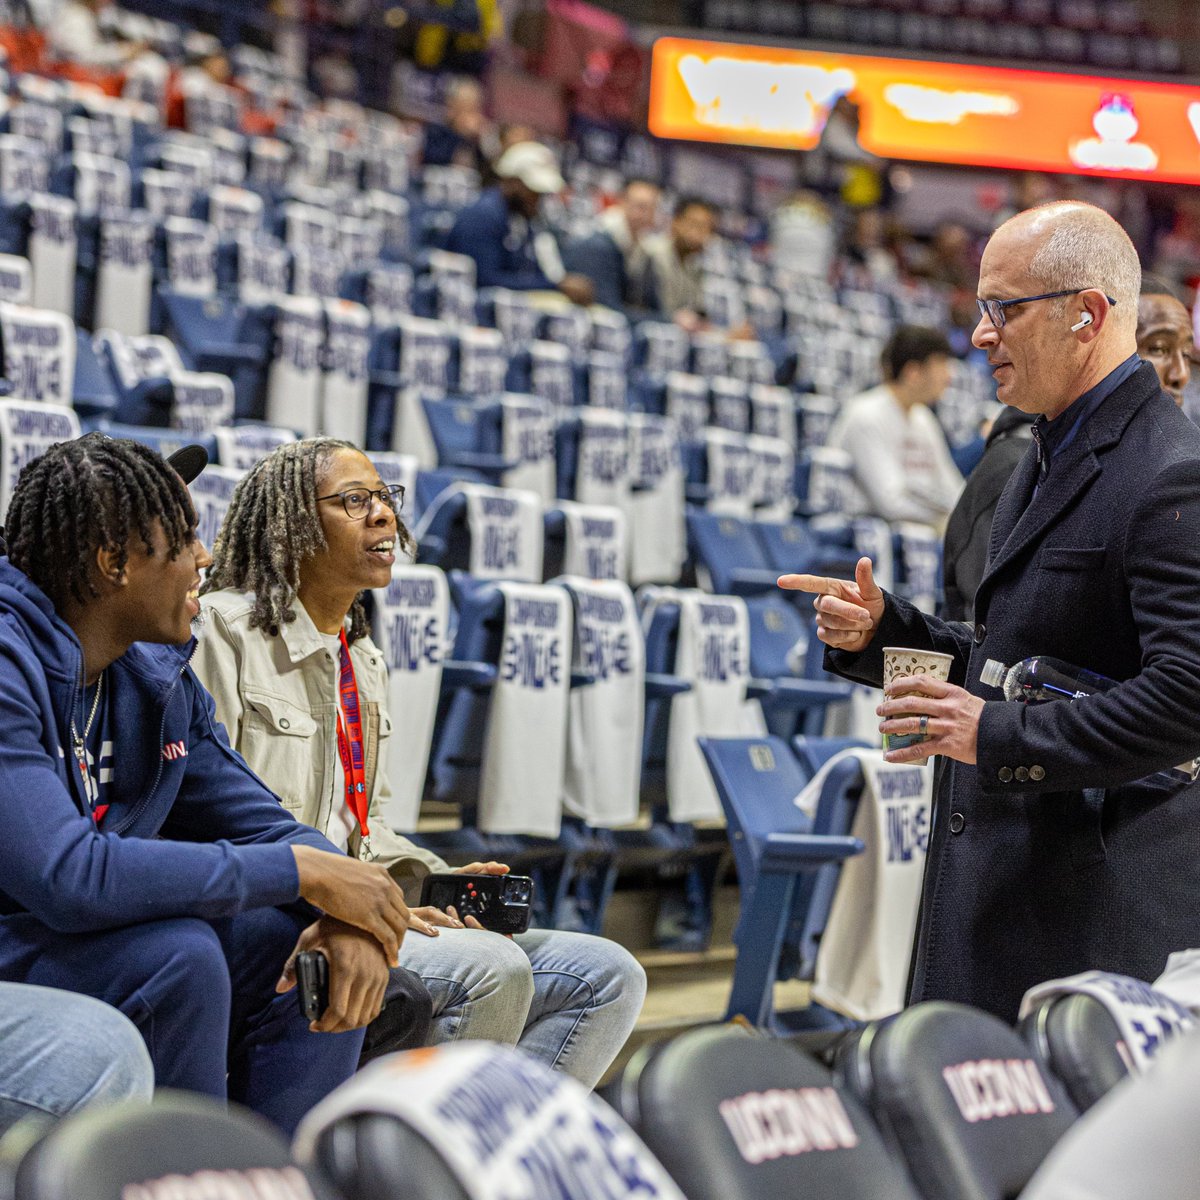 Dan Hurley (@dhurley15) got into Gampel Pavilion today and immediately got in a quick conversation with @AhmadNowell0 and his family ❤️